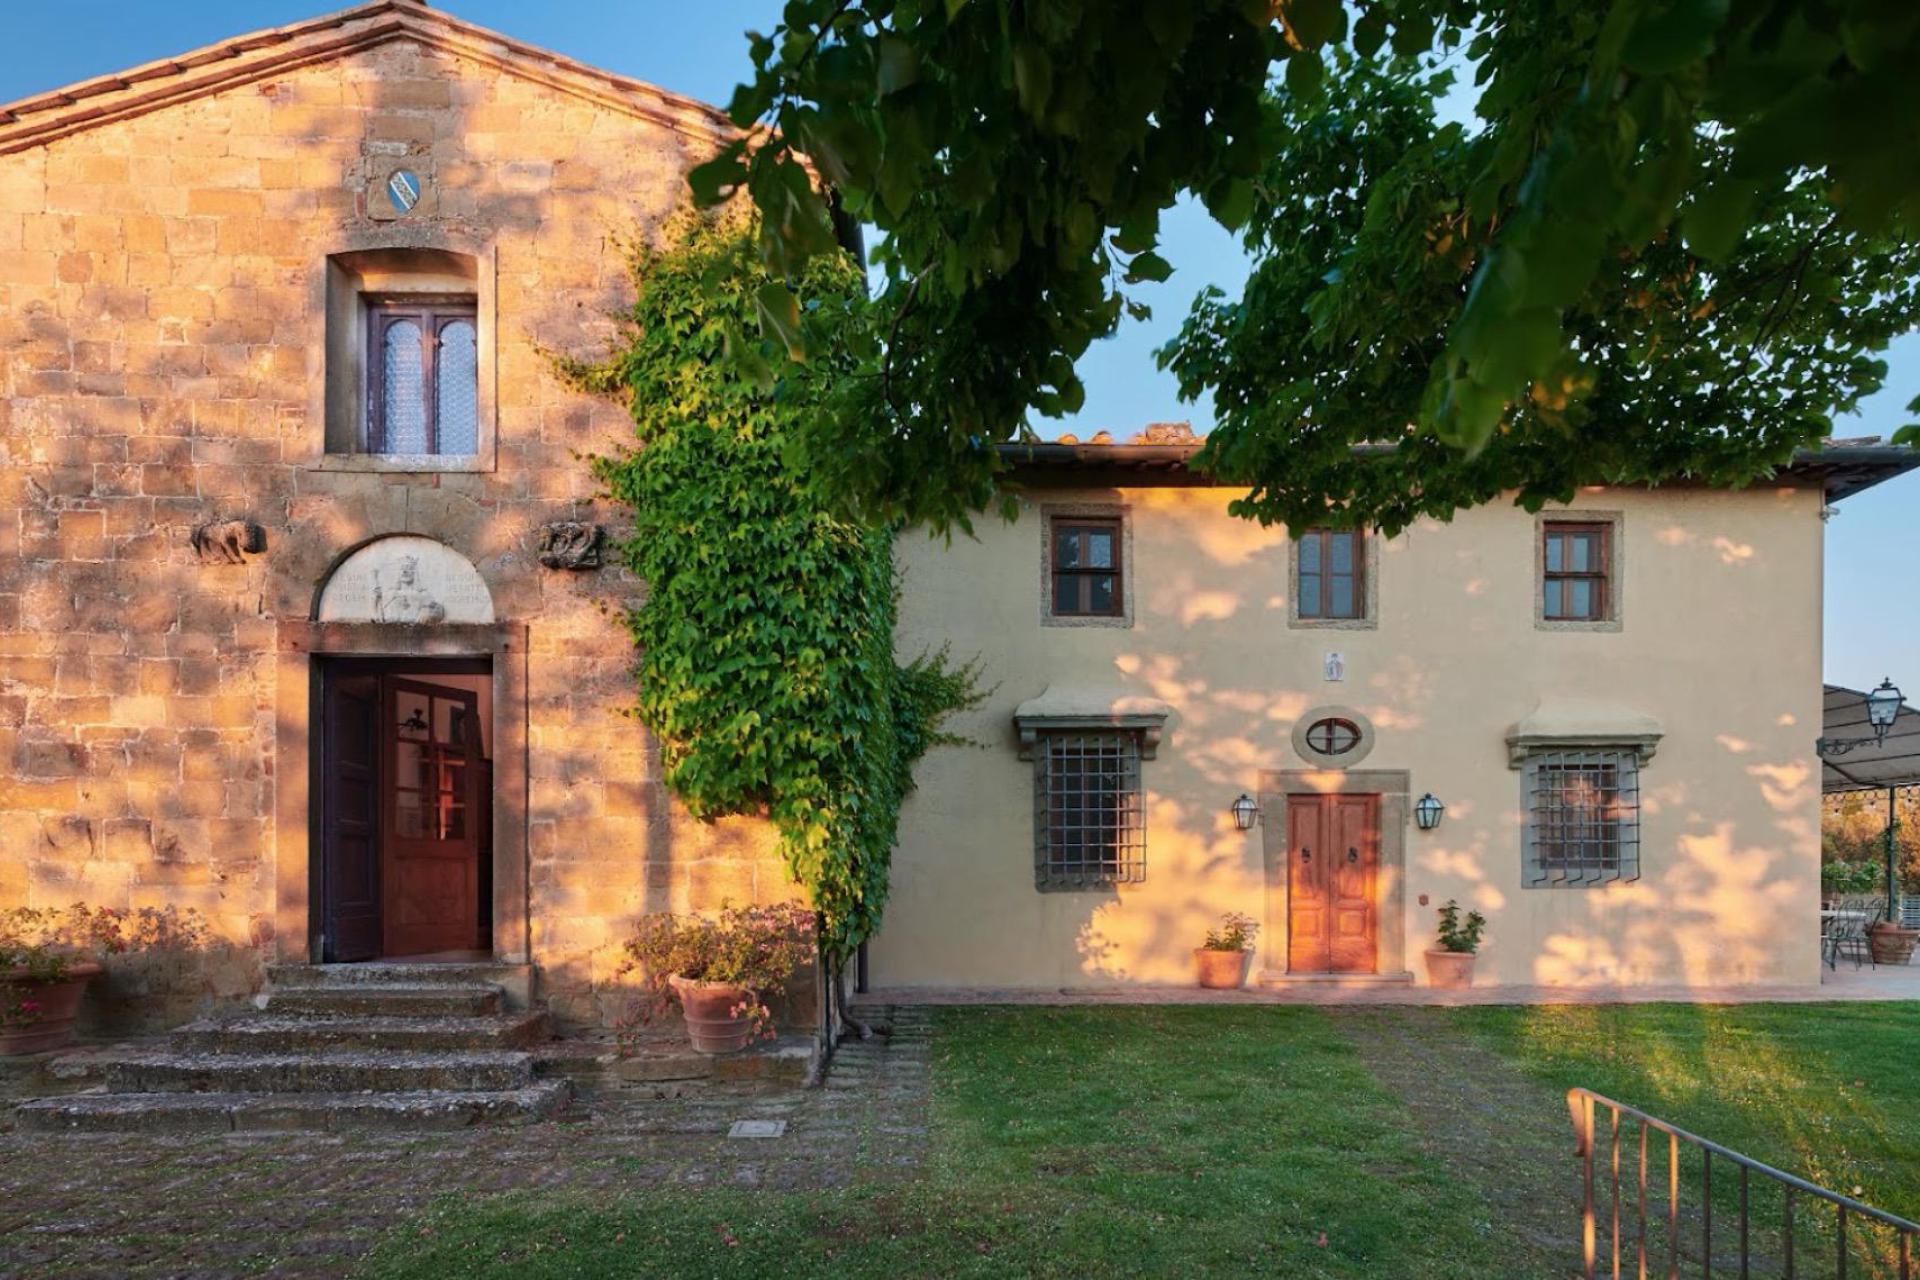 Stylish and authentic agriturismo in the Chianti region